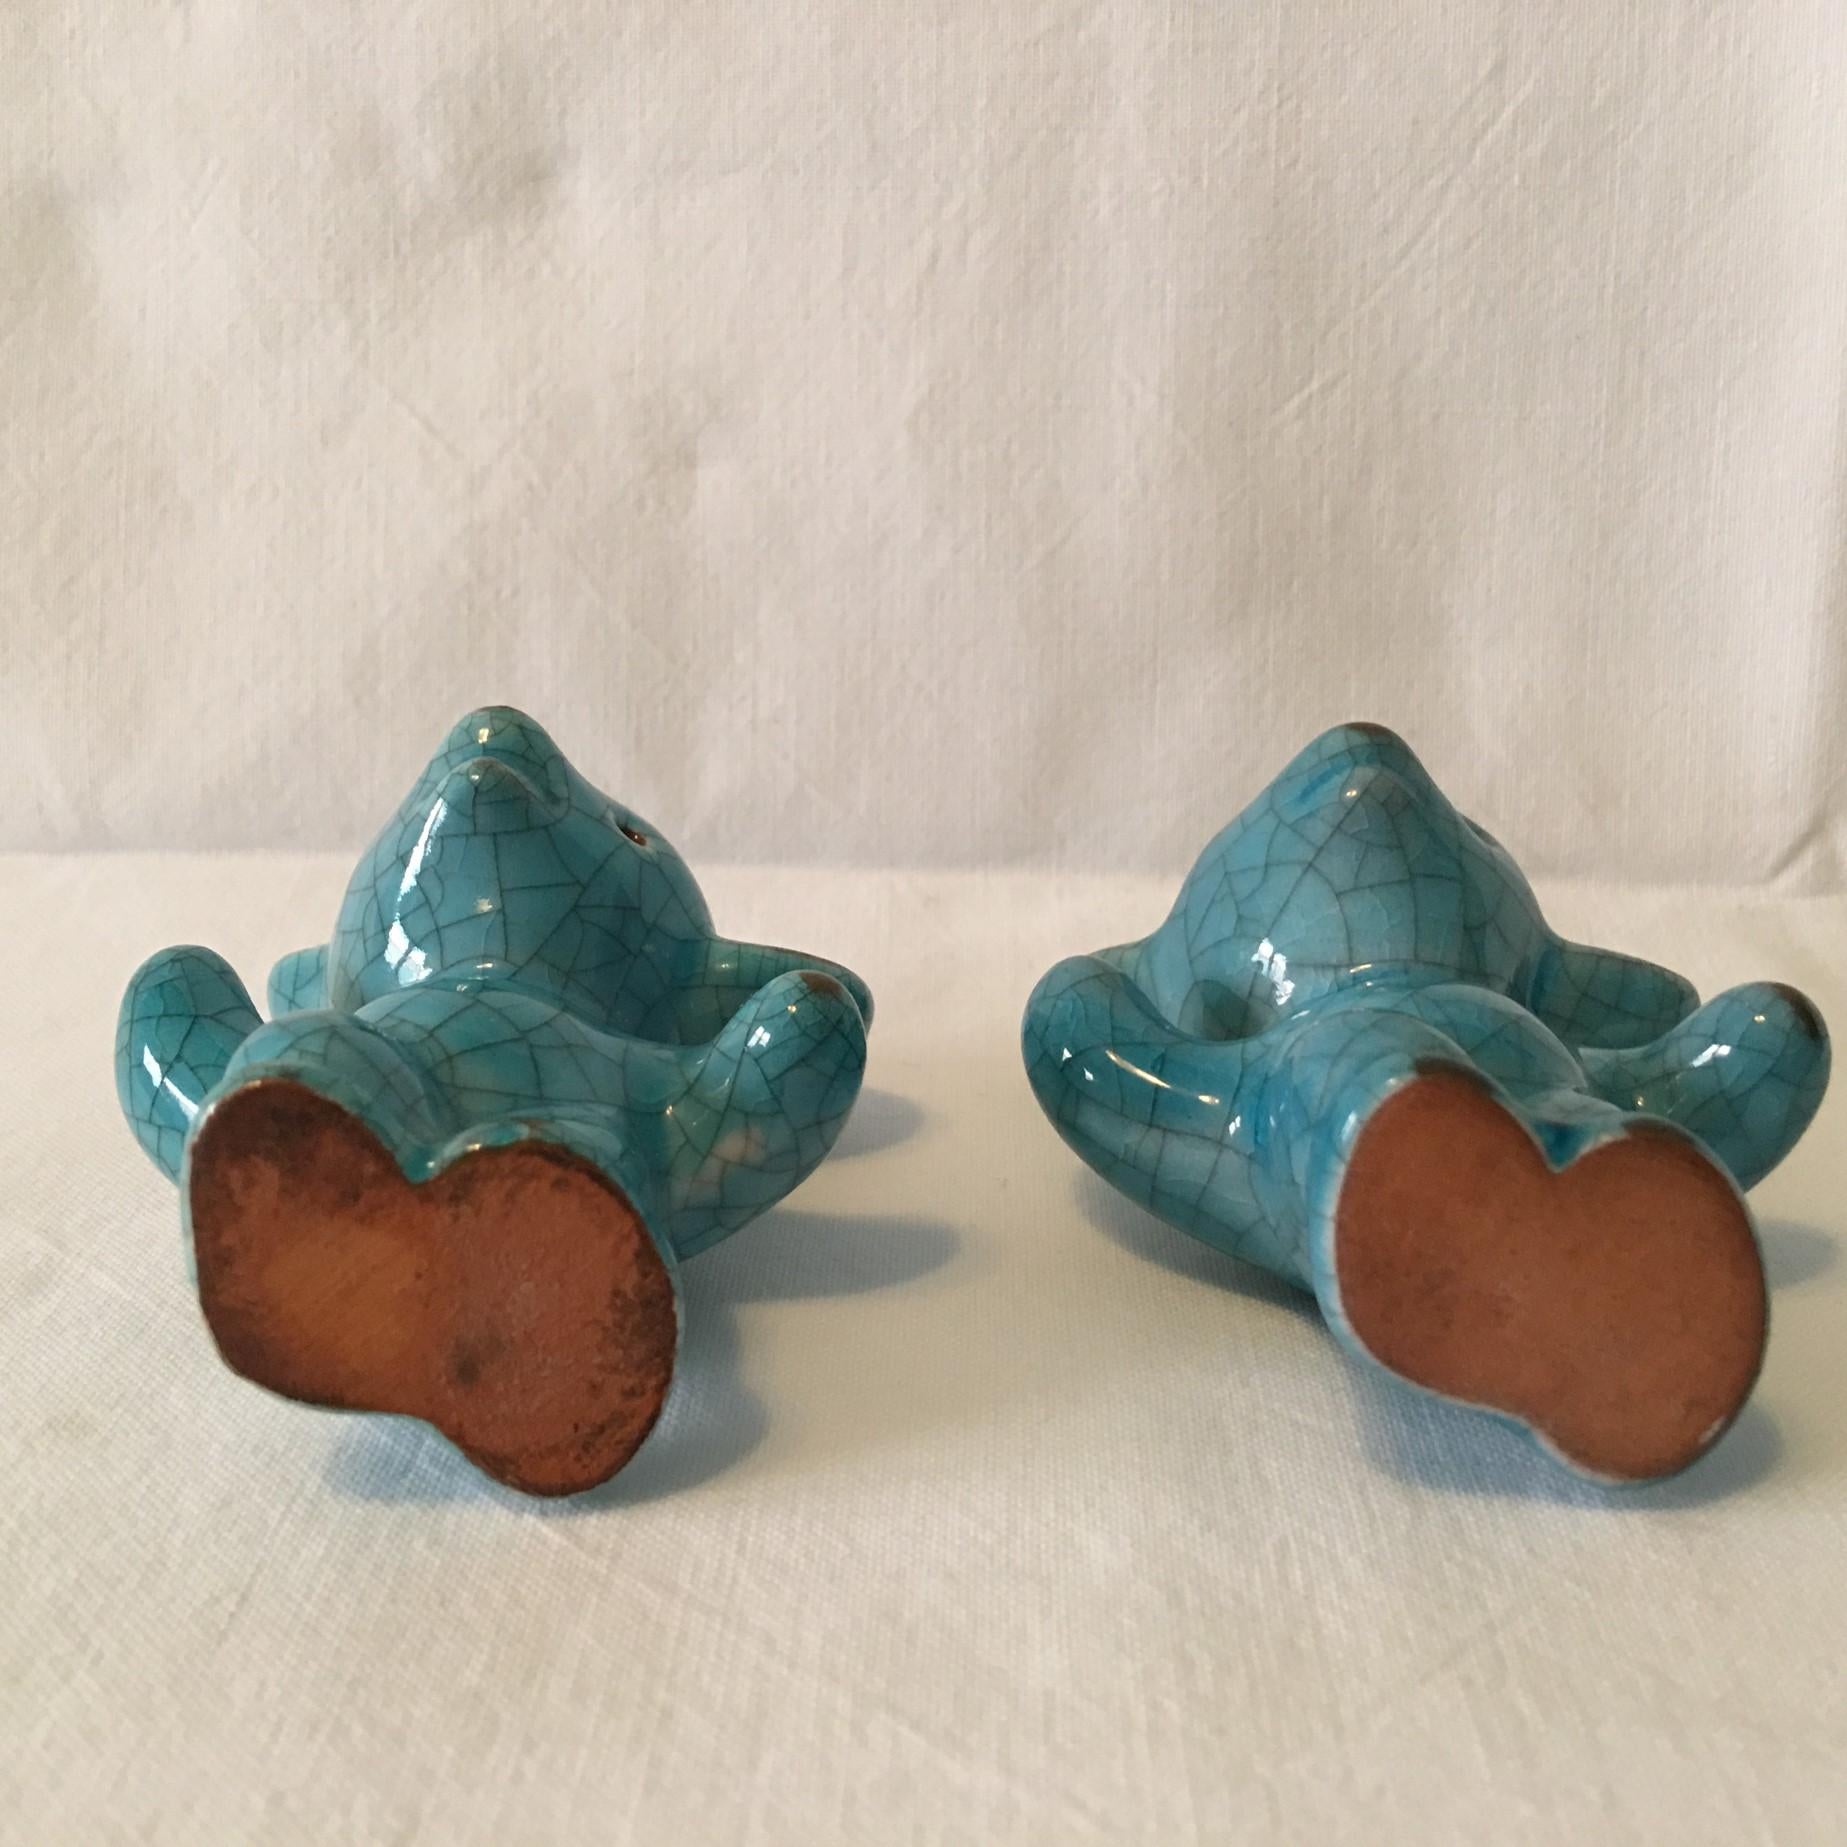 Two Karlsruhe Majolika Ceramic Bears by Walter Bosse In Good Condition For Sale In Frisco, TX